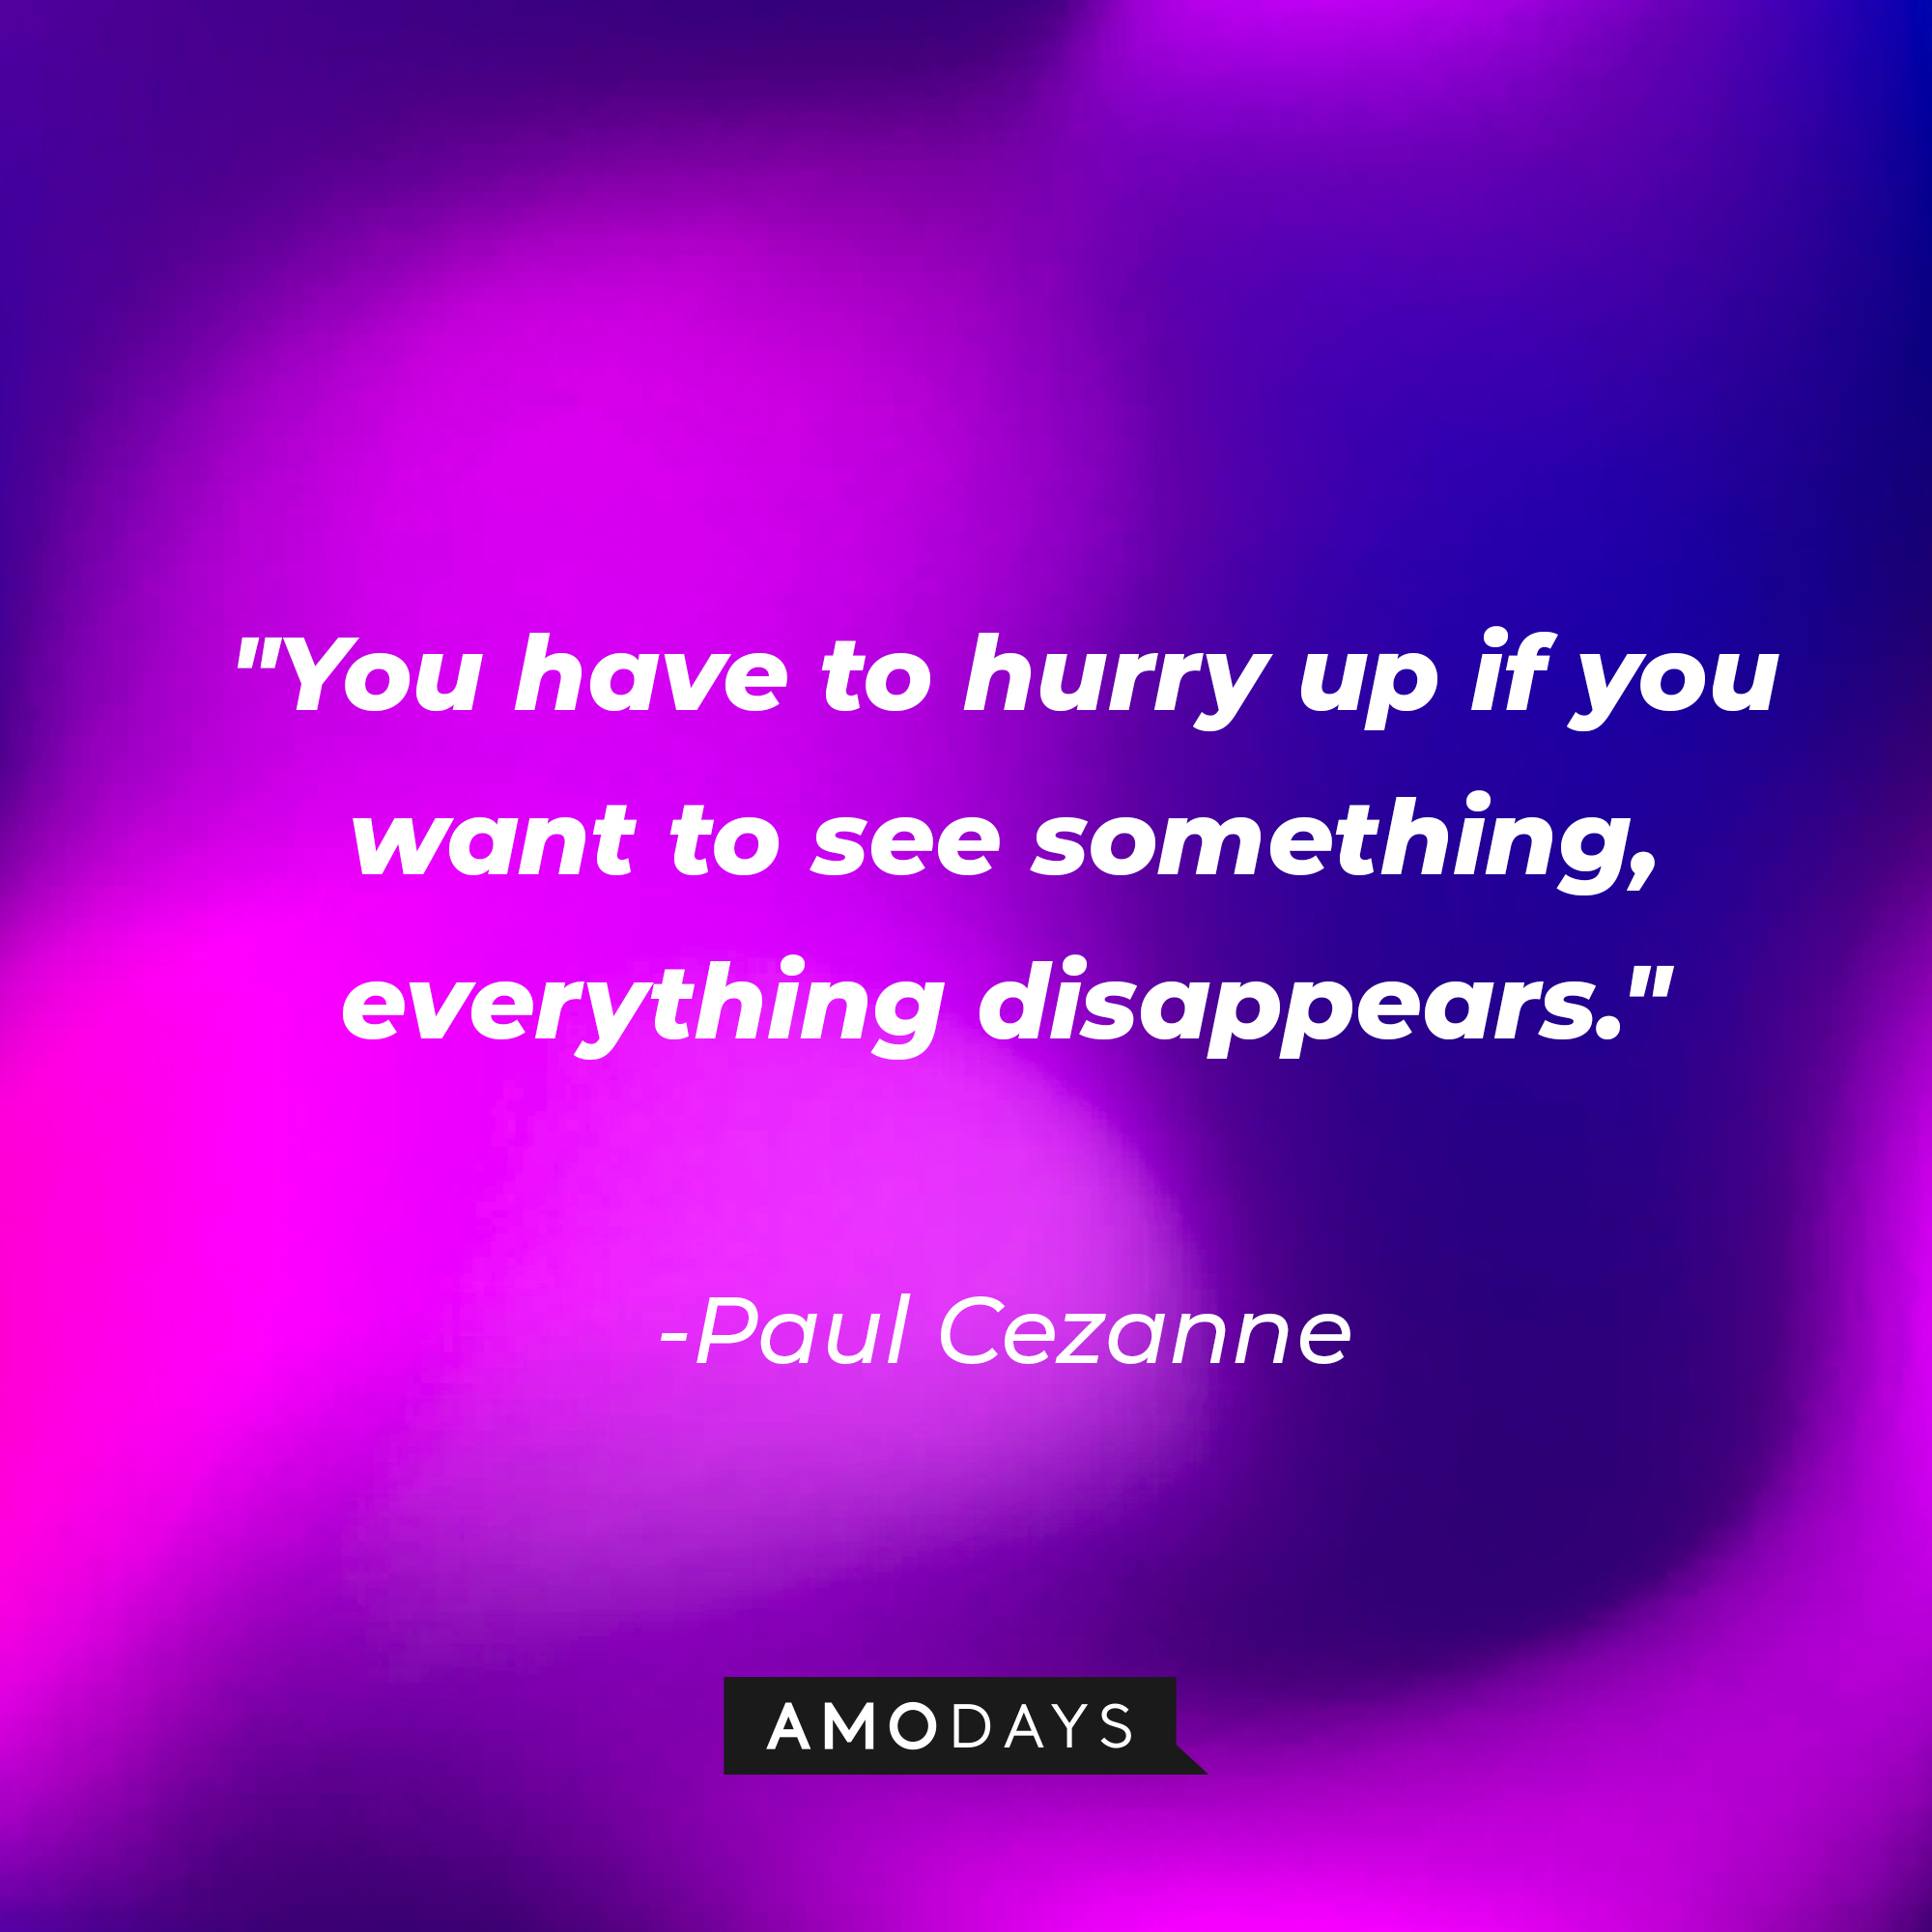 Paul Cezanne's quote: "You have to hurry up if you want to see something, everything disappears." | Image: AmoDays